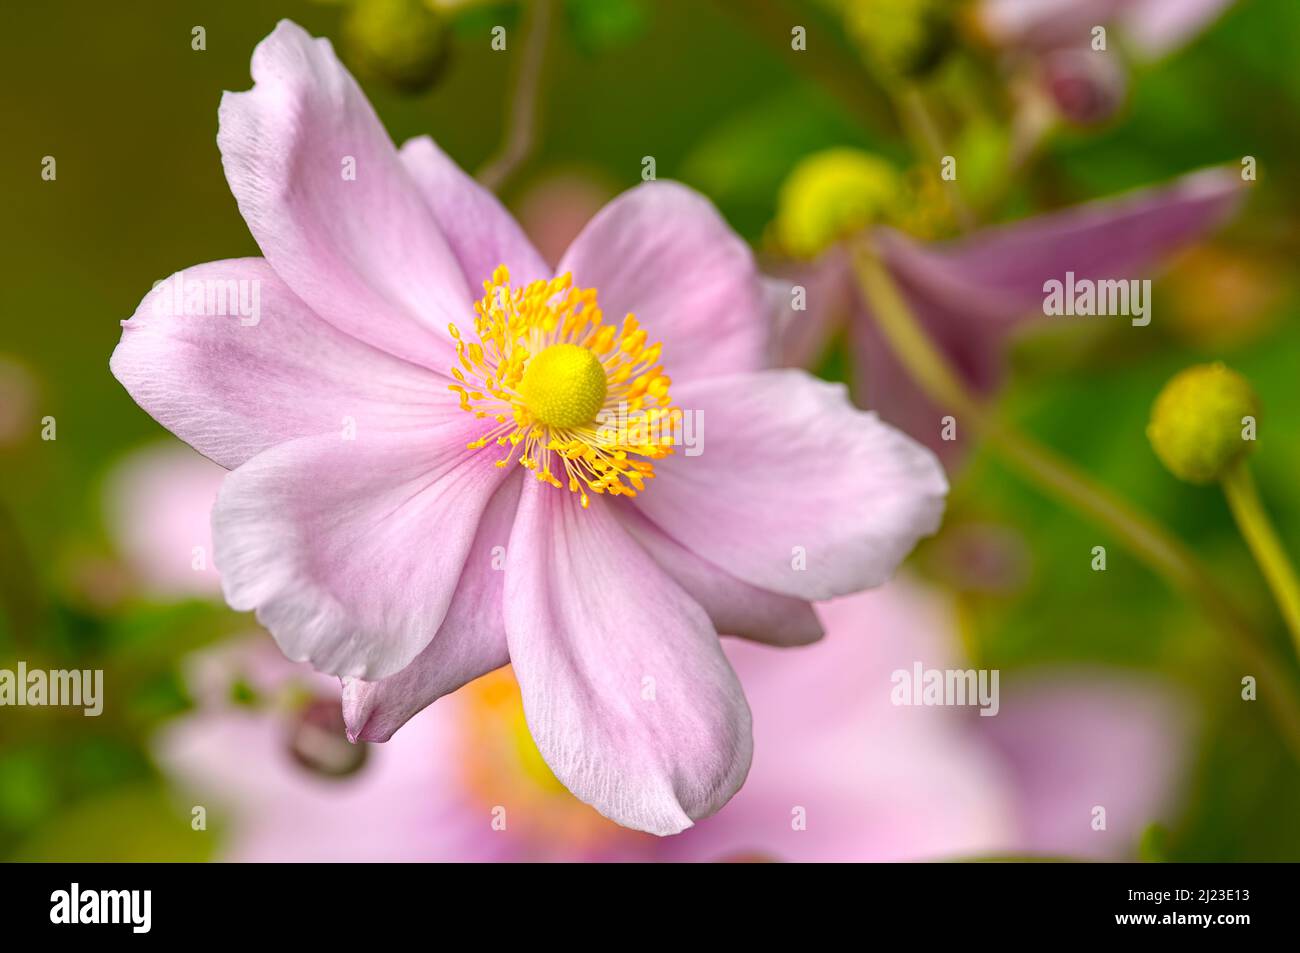 A single pink blossom of a Japanese Anemone (Anemone hupehensis). Stock Photo